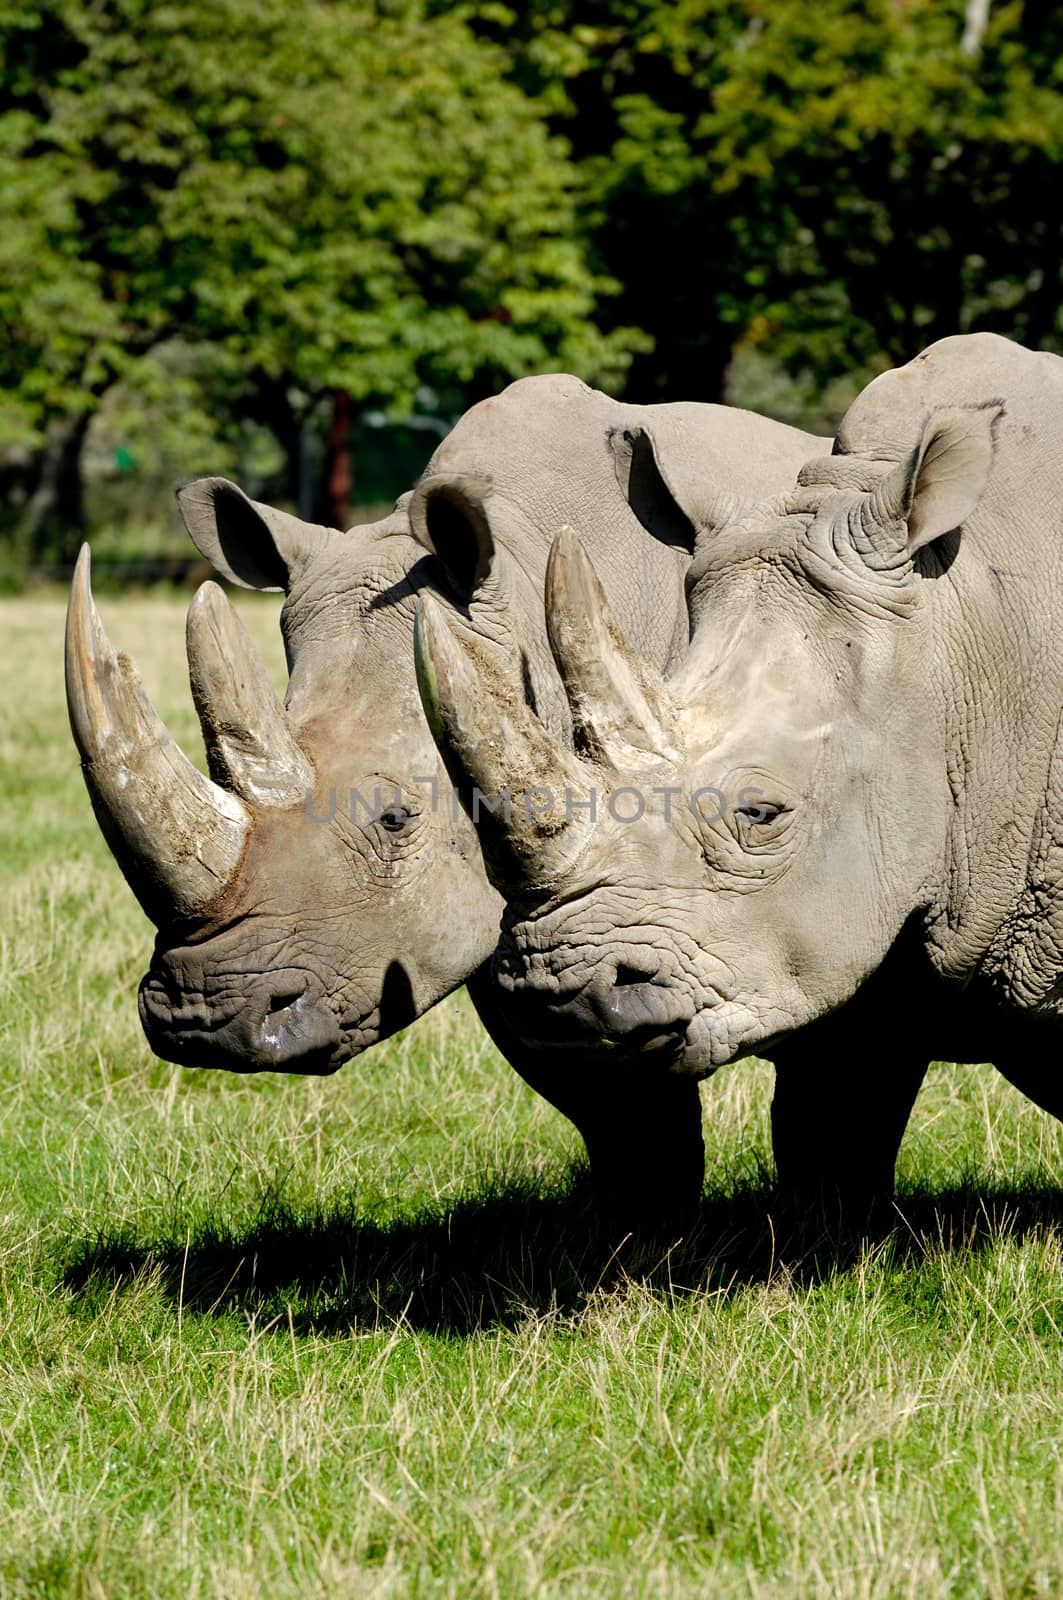 Two rhino is standing and looking on green grass